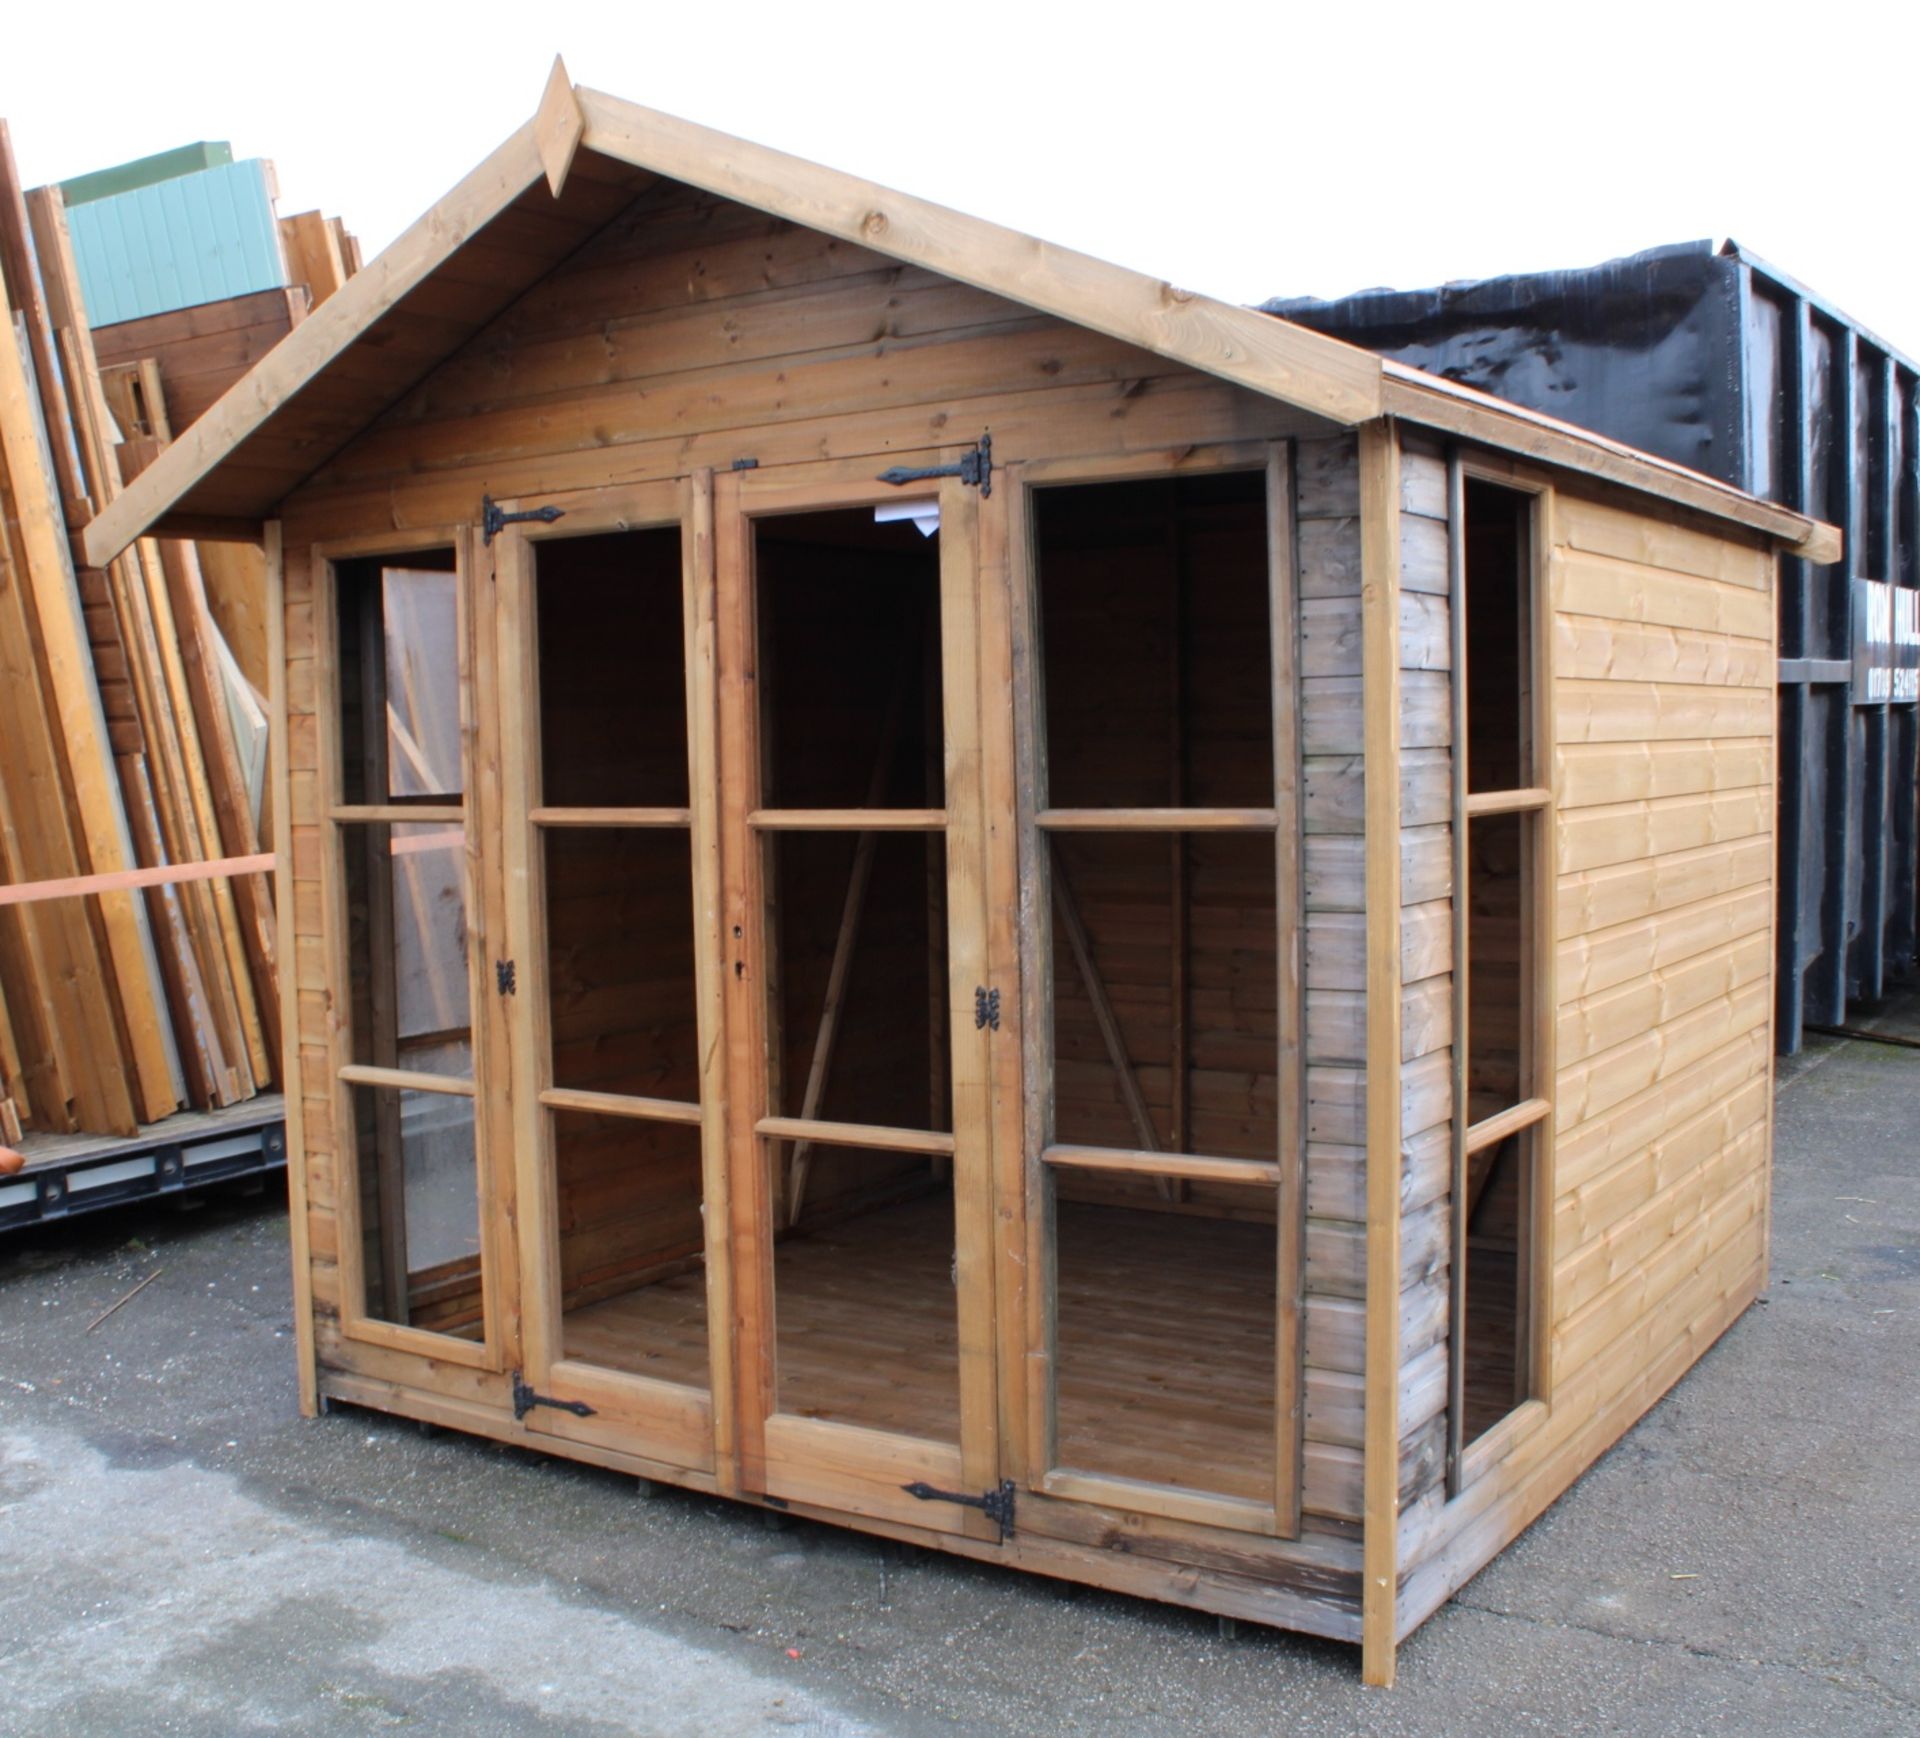 4 9/2 8x8 'ascot' summerhouse shed, Standard 16mm Nominal Cladding - Image 3 of 3